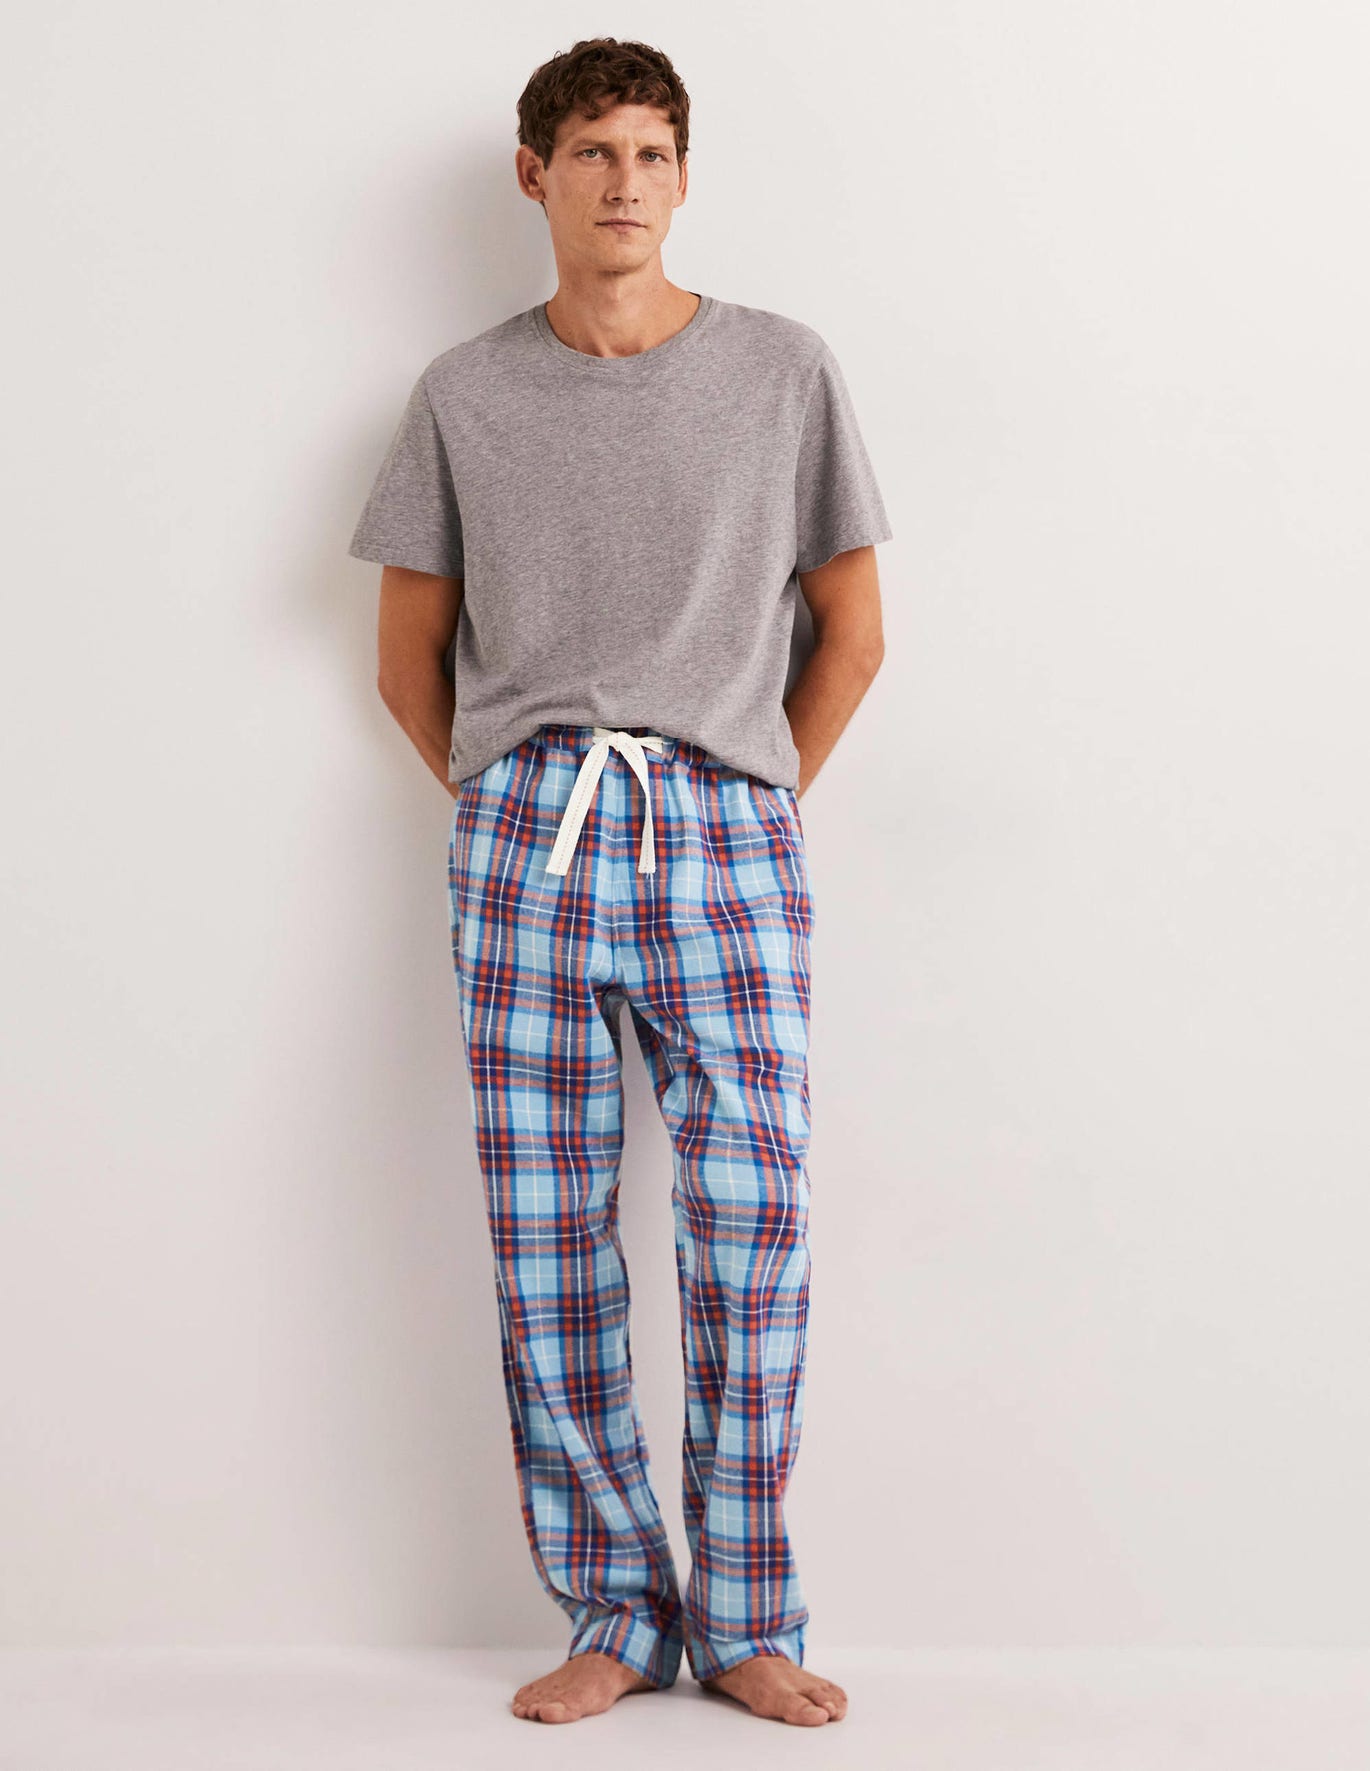 Boden Brushed Cotton Pajama Bottoms - Dusty Blue/Red Check